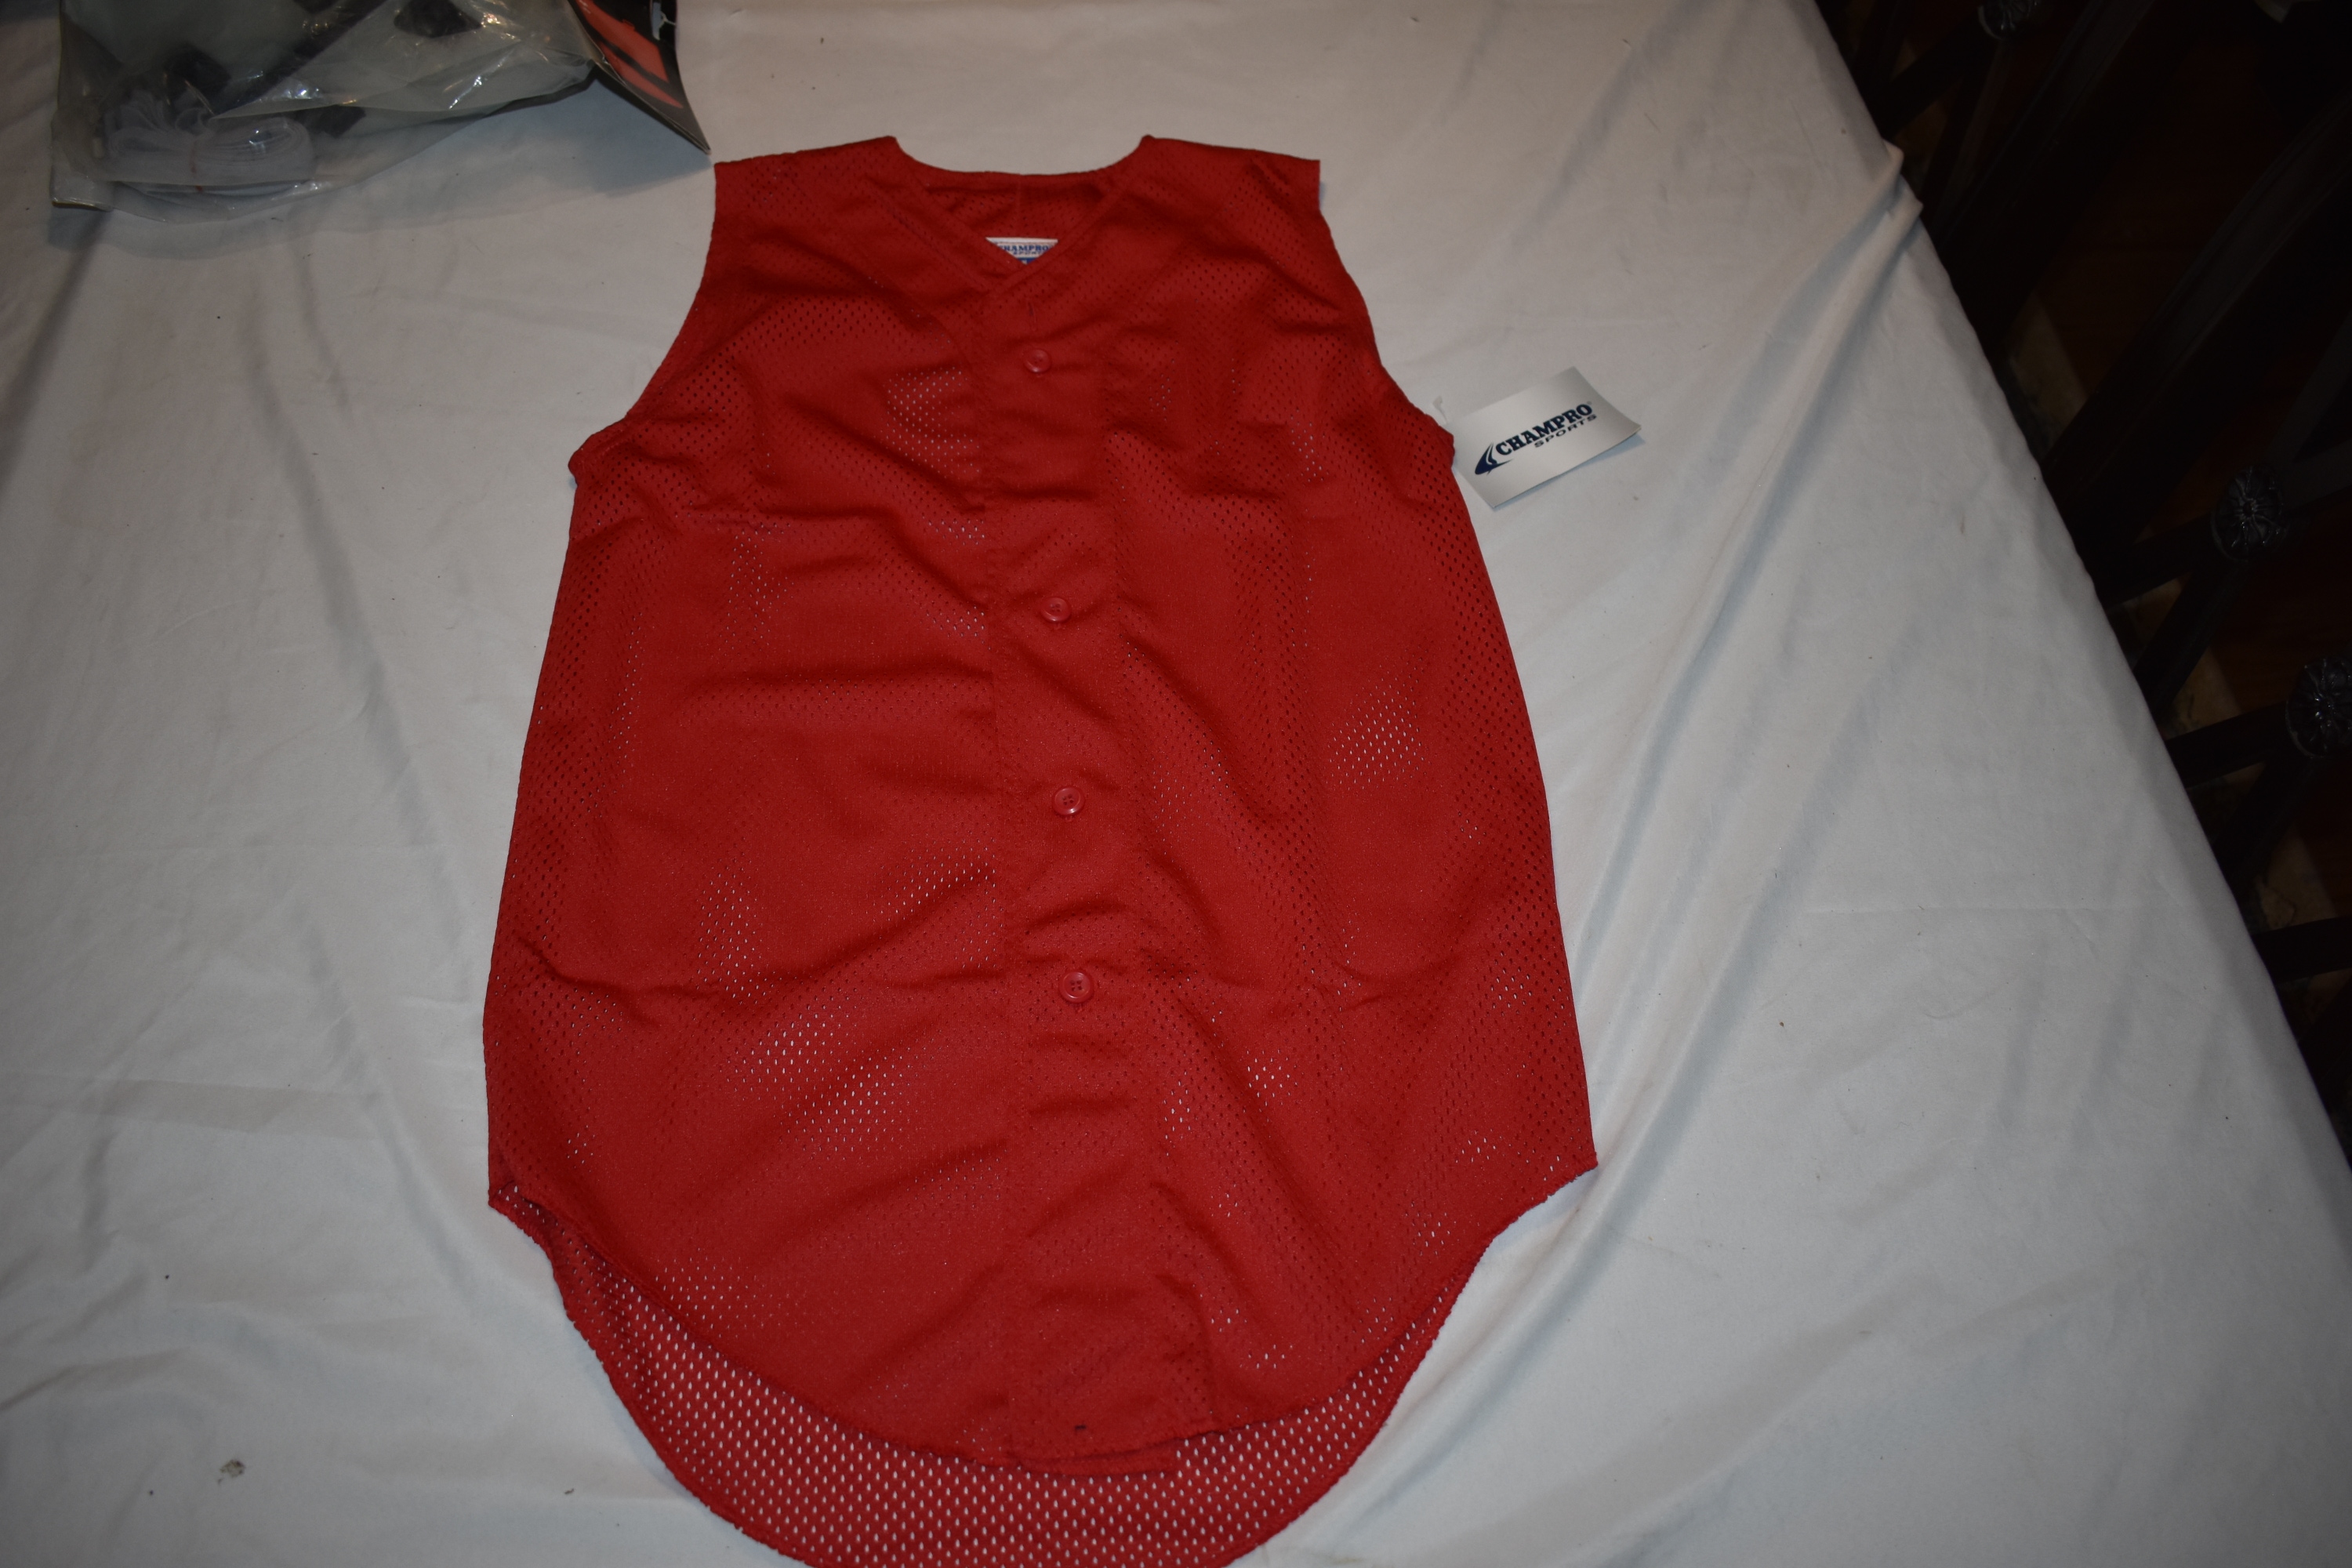 NEW - Champro Mesh Button Up Jersey, Red, Youth XL